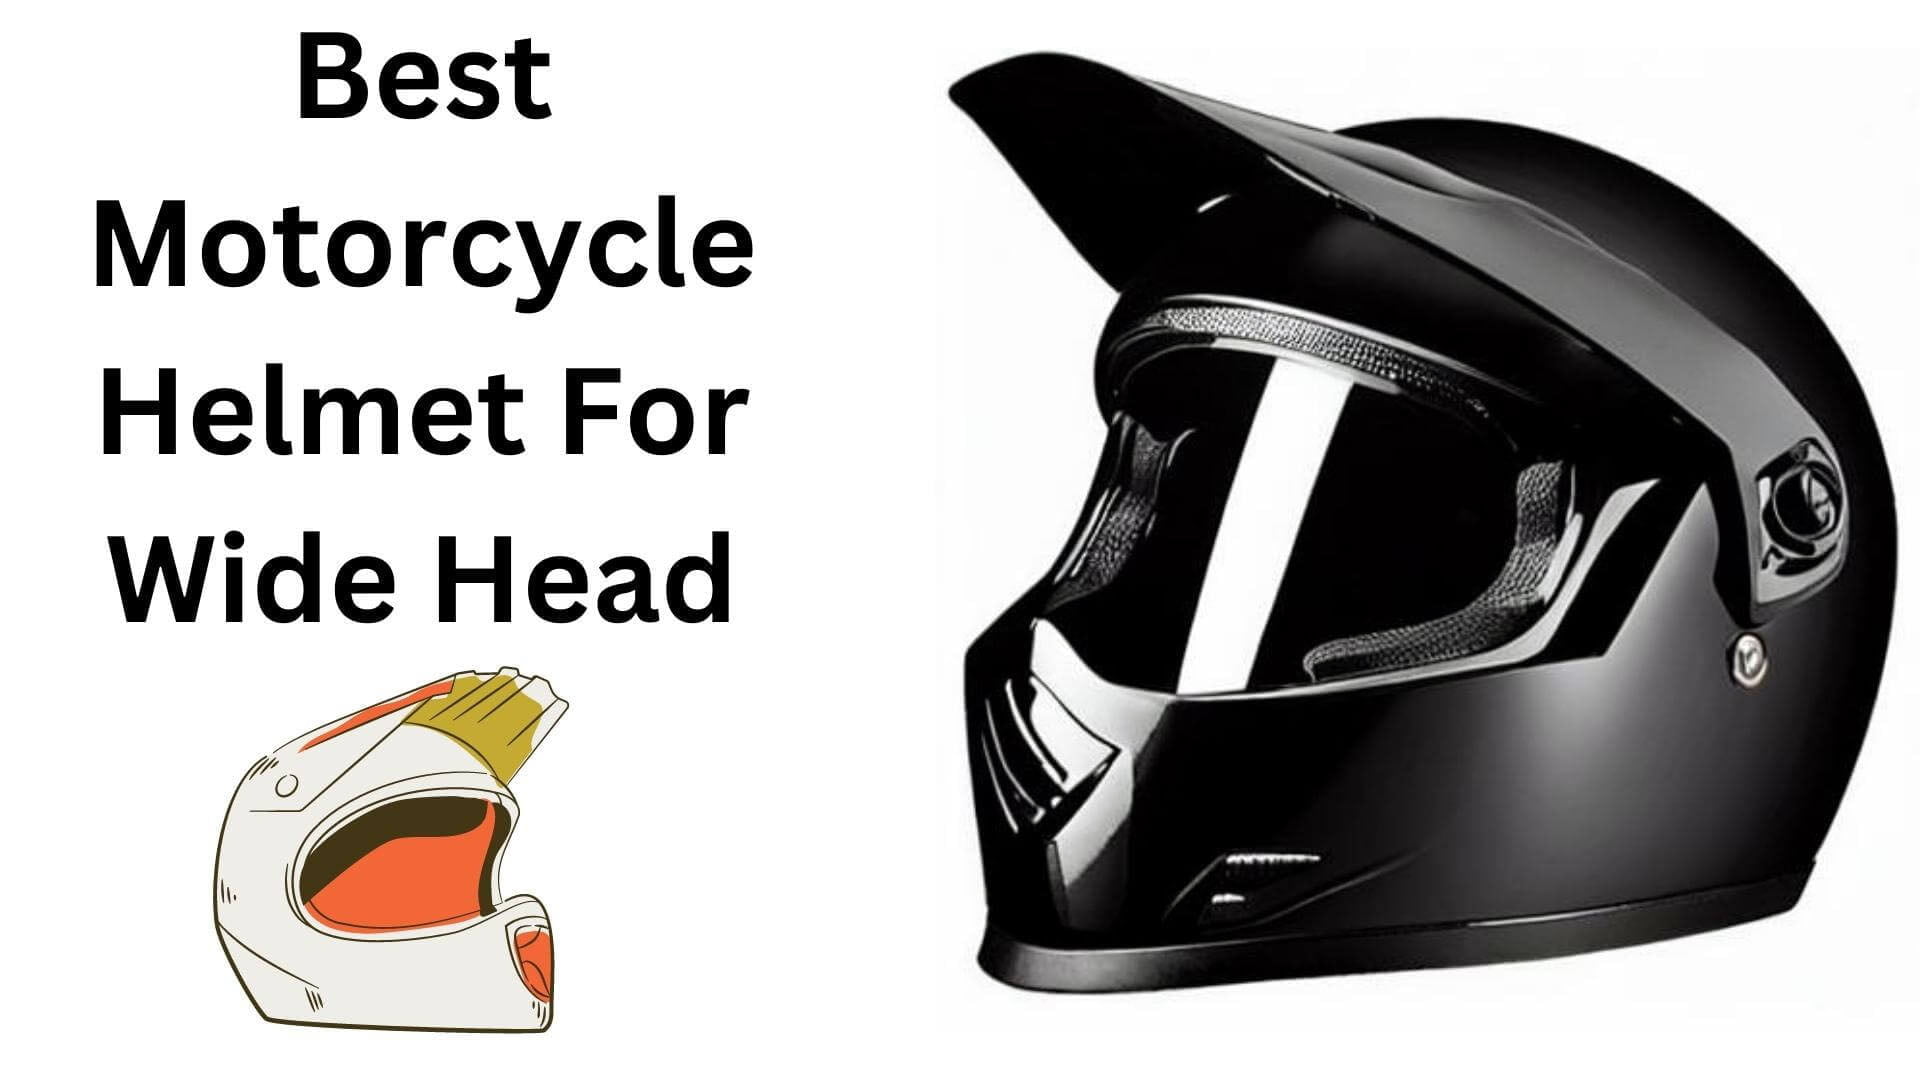 Best Motorcycle Helmet For Wide Head That’s Perfect For You!